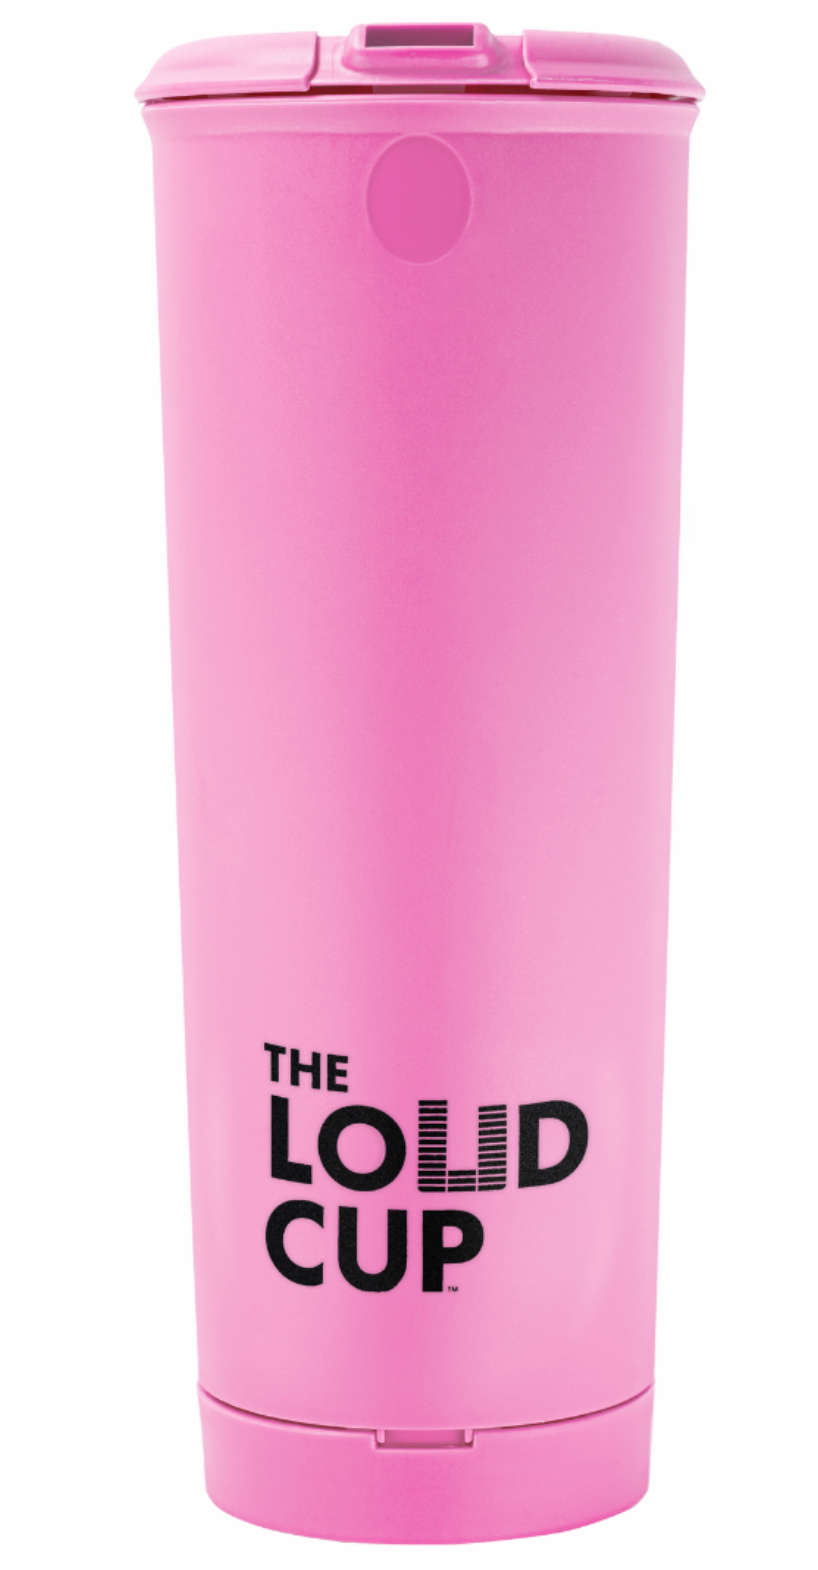 THE LOUD CUP!